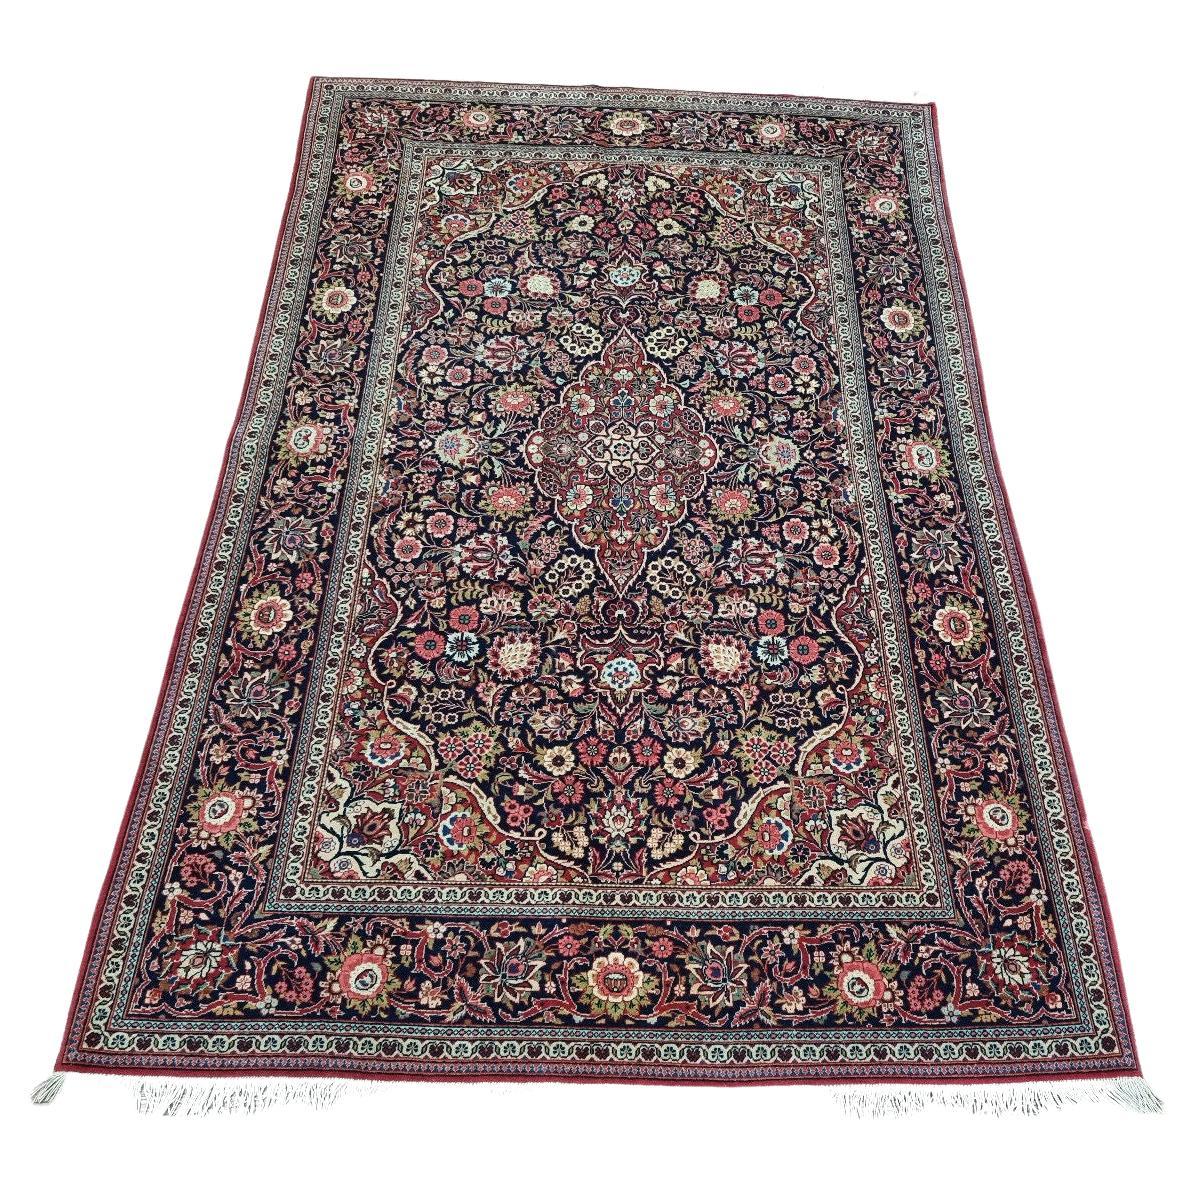 Handmade Antique Persian Style Kashan Rug 4.3' x 6.6', 1920s - 1D77 For Sale